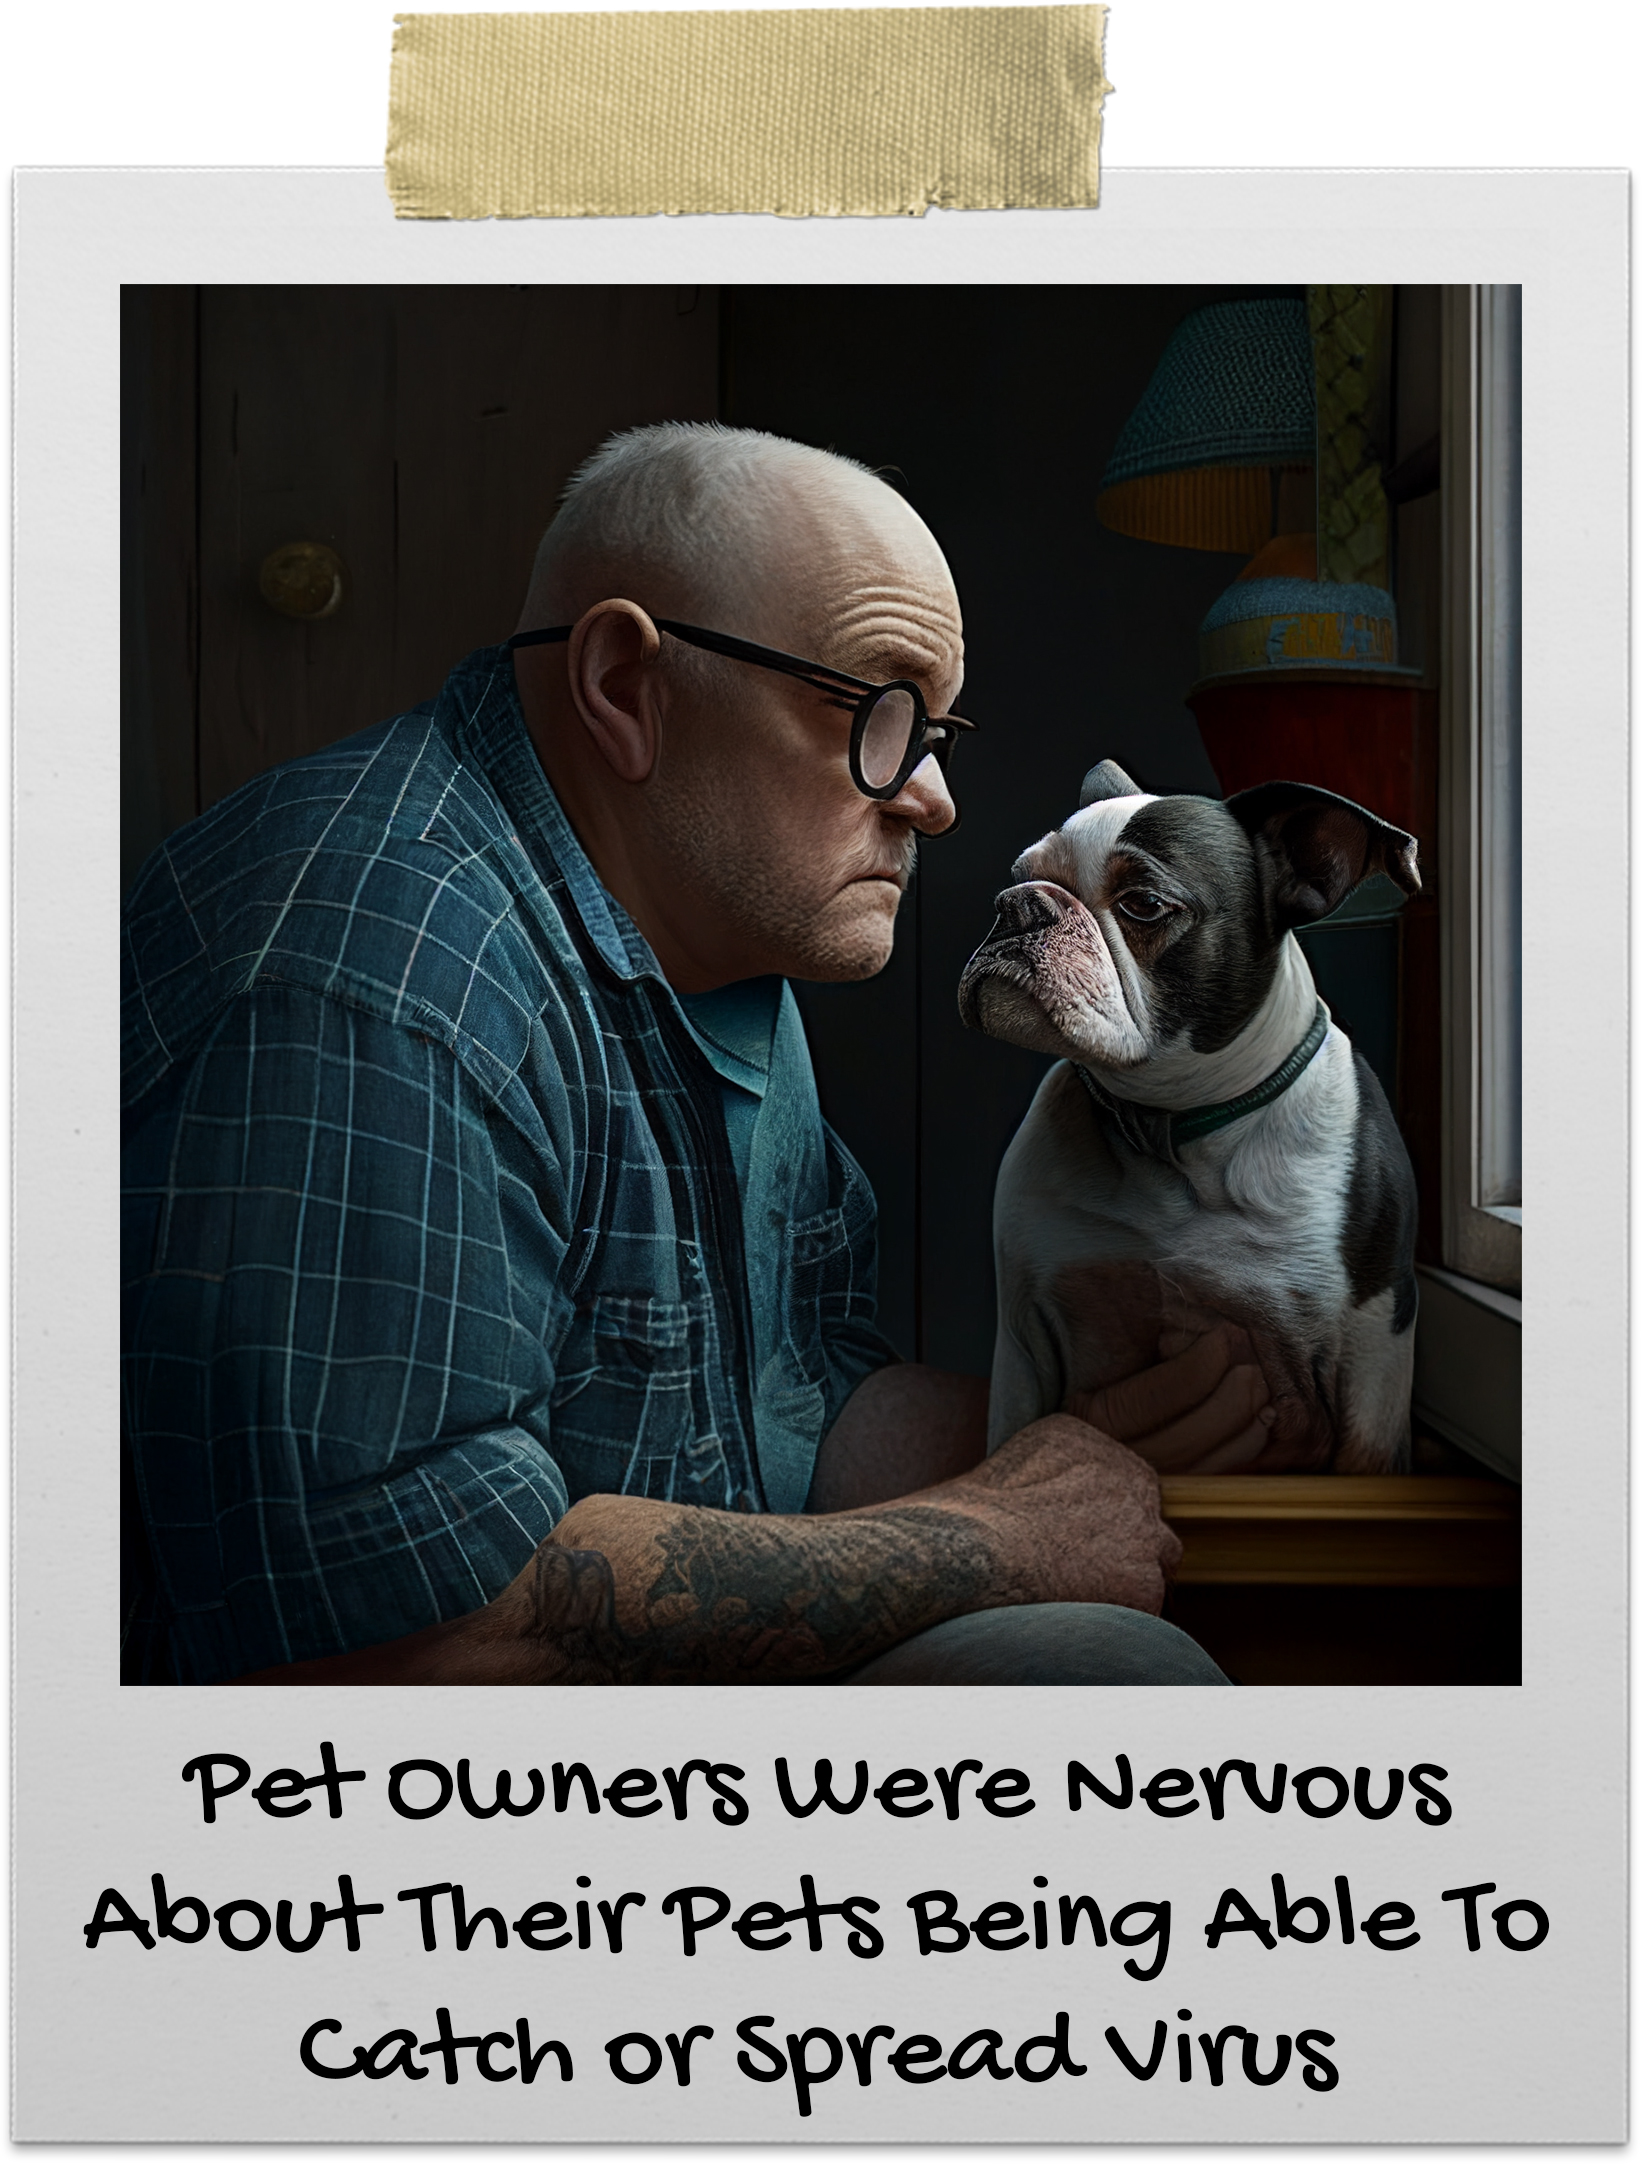 Bald man with glasses looking eye to eye with his pet dog